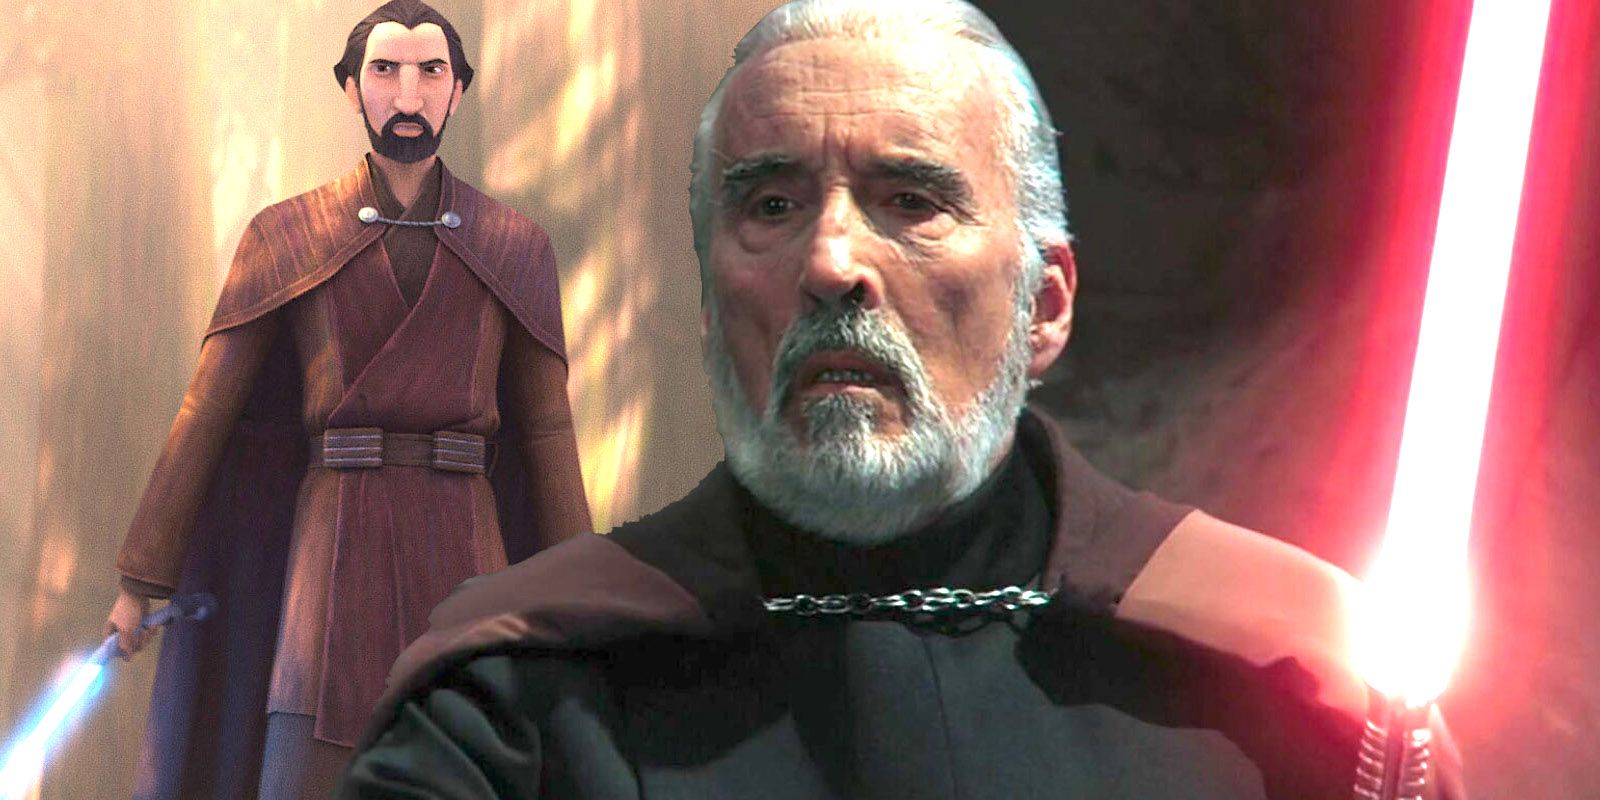 Count Dooku in Star Wars Prequels and Tales of the Jedi